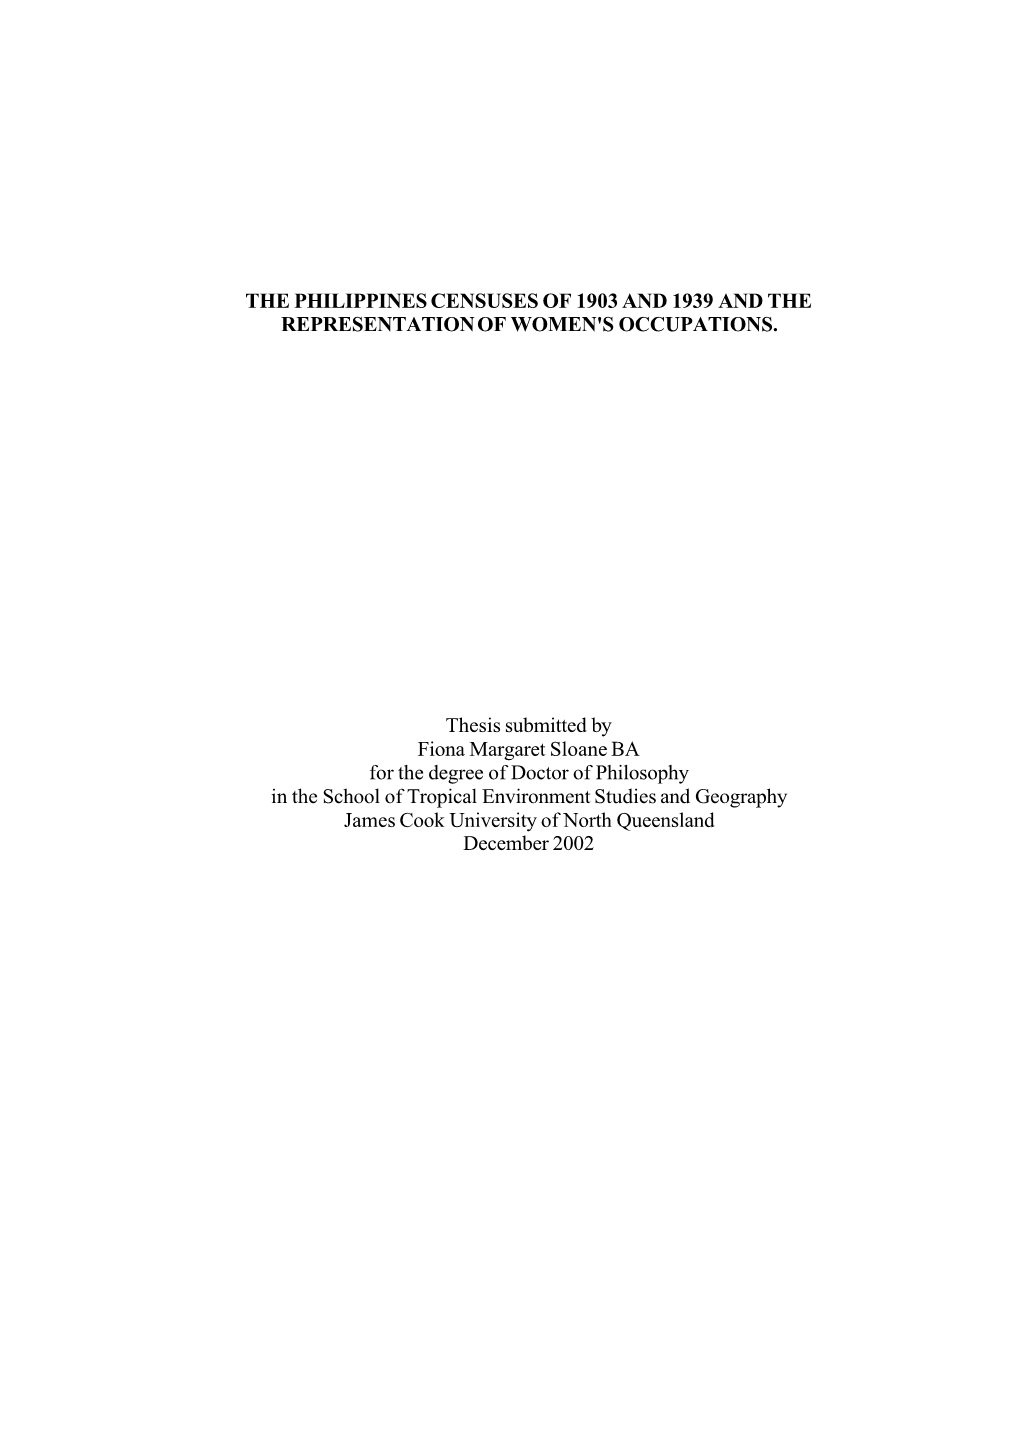 THE PHILIPPINES CENSUSES of 1903 and 1939 and the REPRESENTATION of WOMEN's OCCUPATIONS. Thesis Submitted by Fiona Margaret Sloa